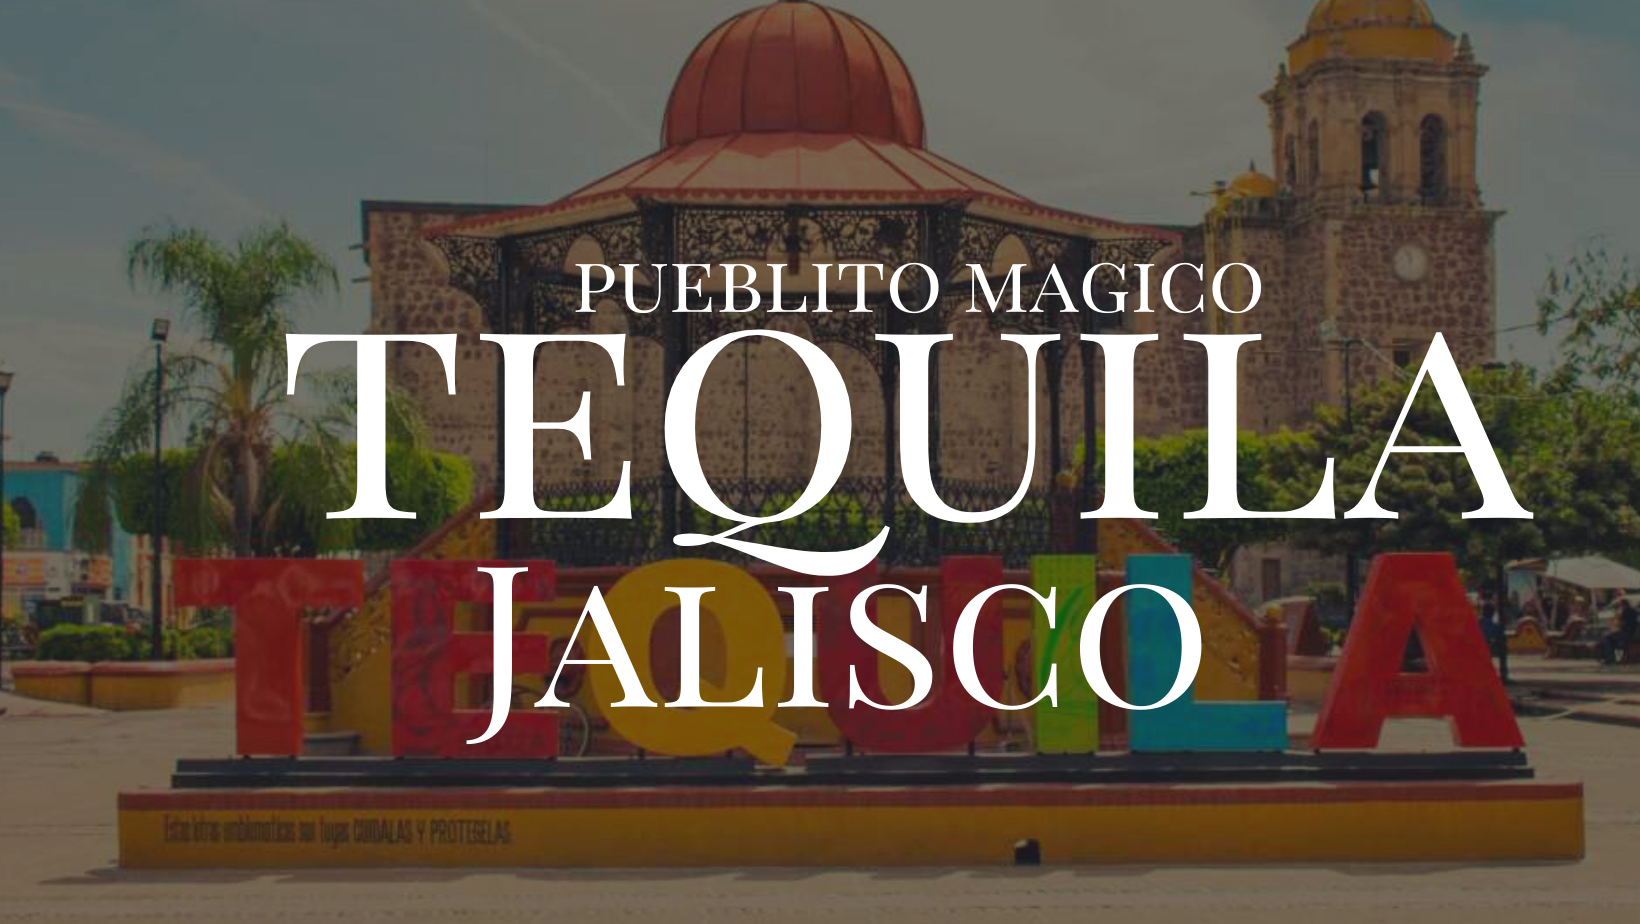 Destination: Let’s have a drink… or two in Tequila, Jalisco!